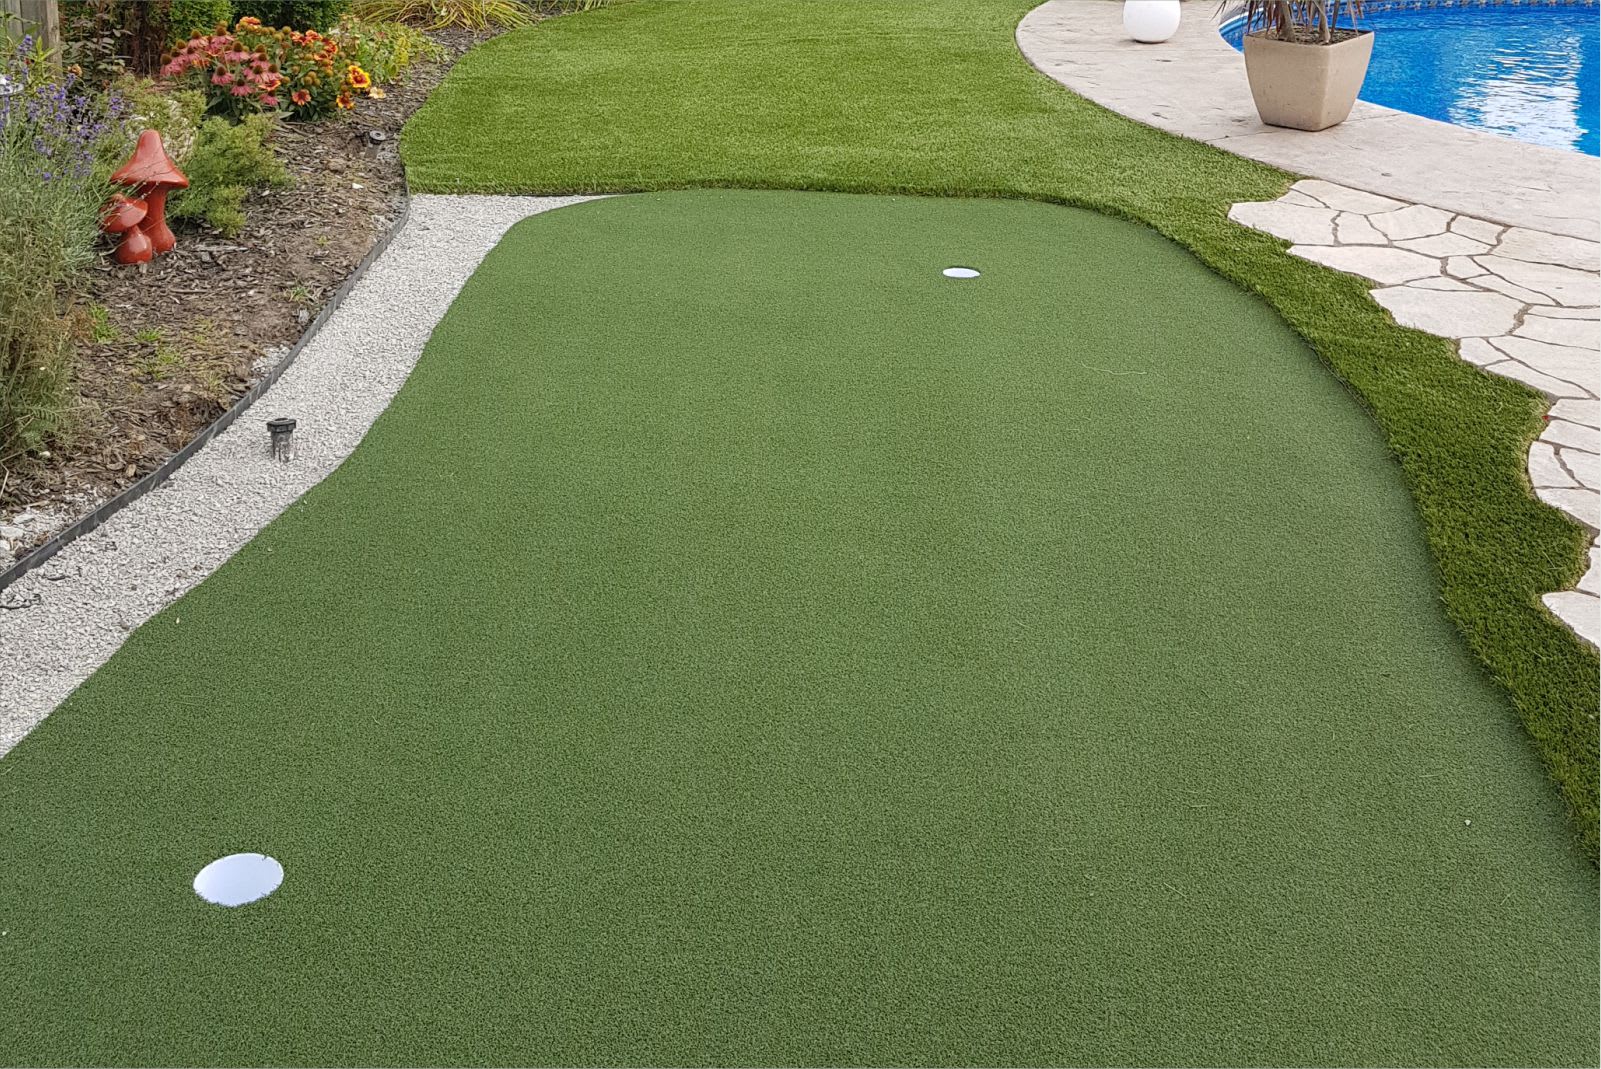 landscape turf with putting green in backyard